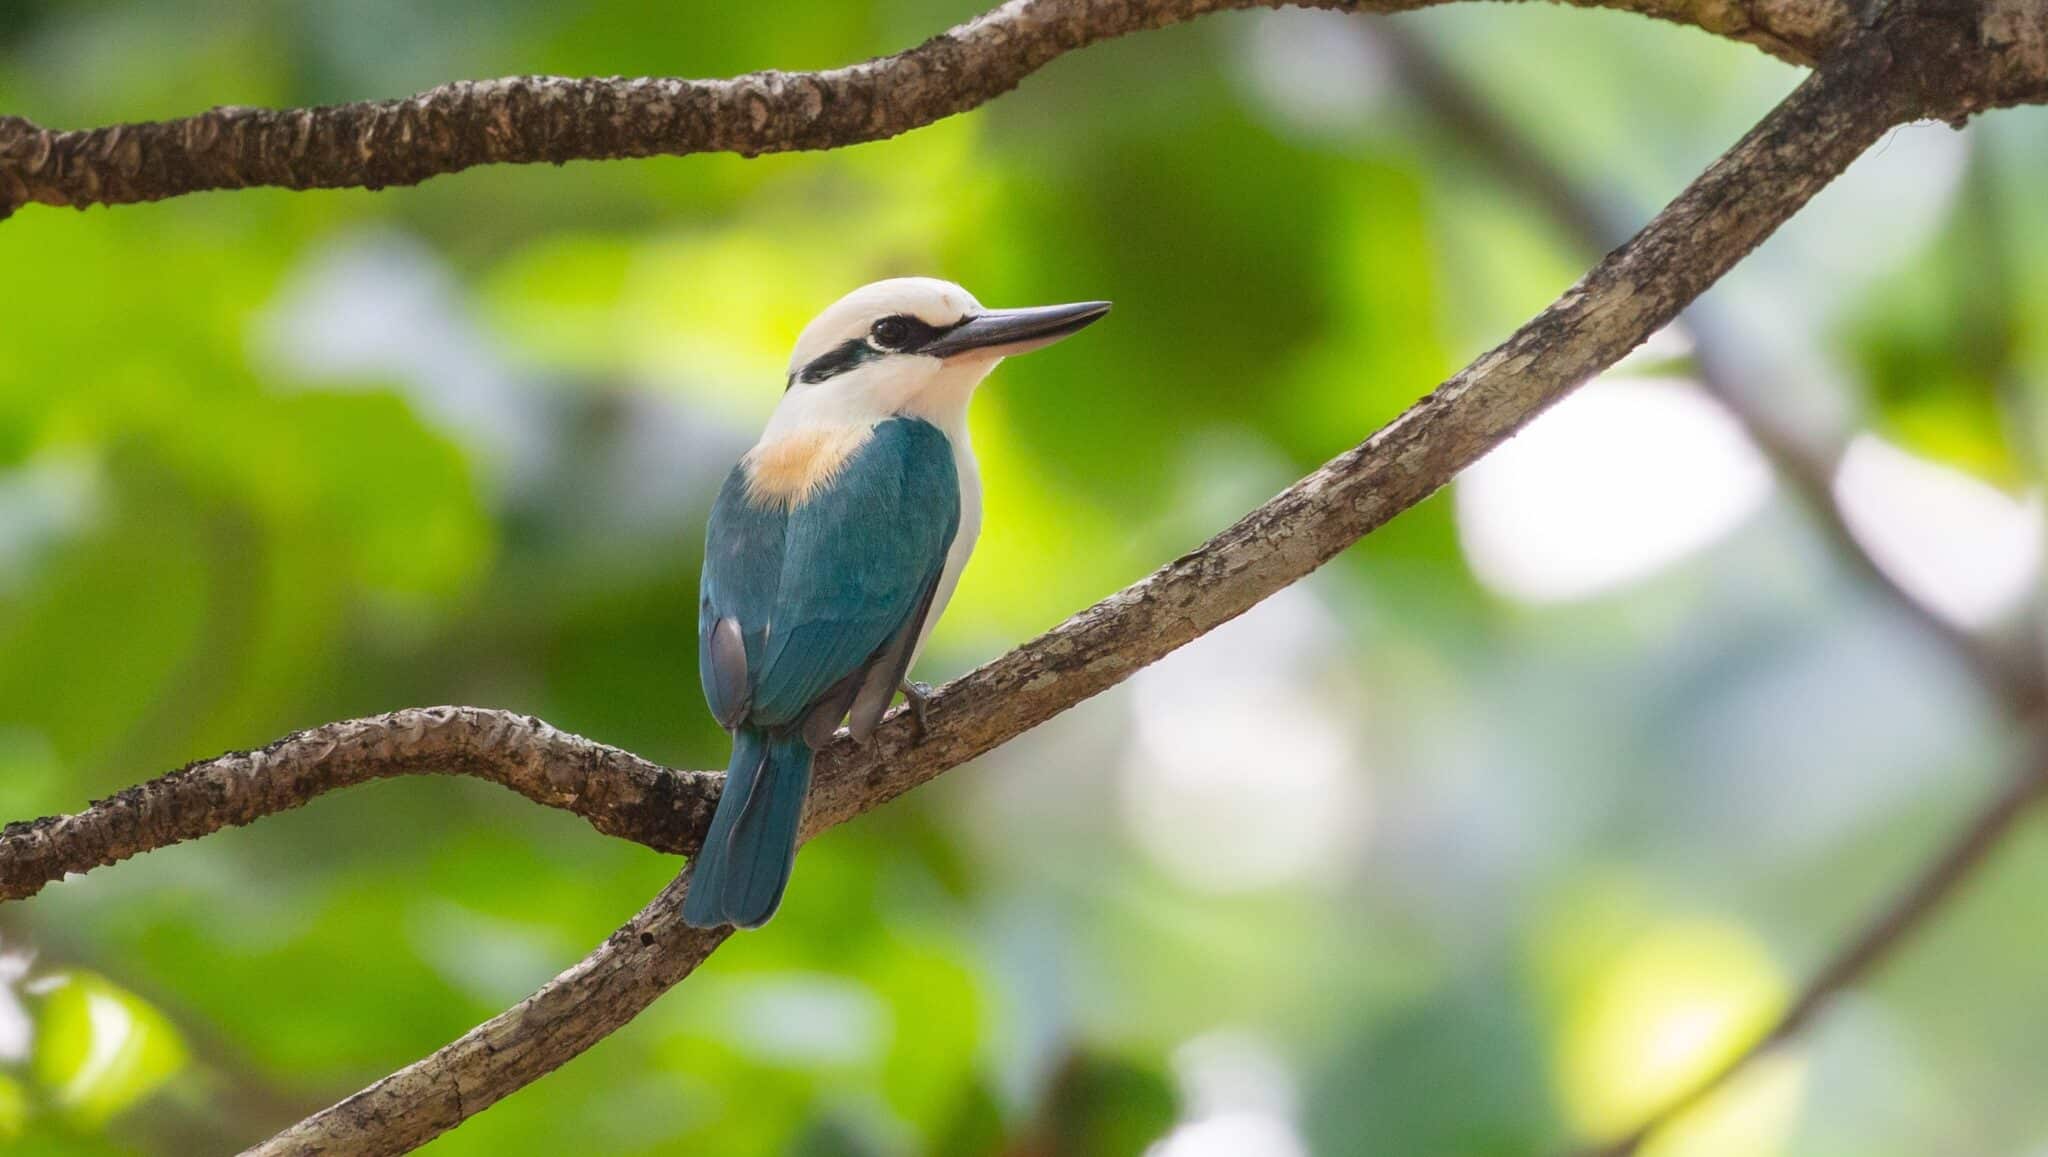 Mission critical: saving an endemic kingfisher on the brink